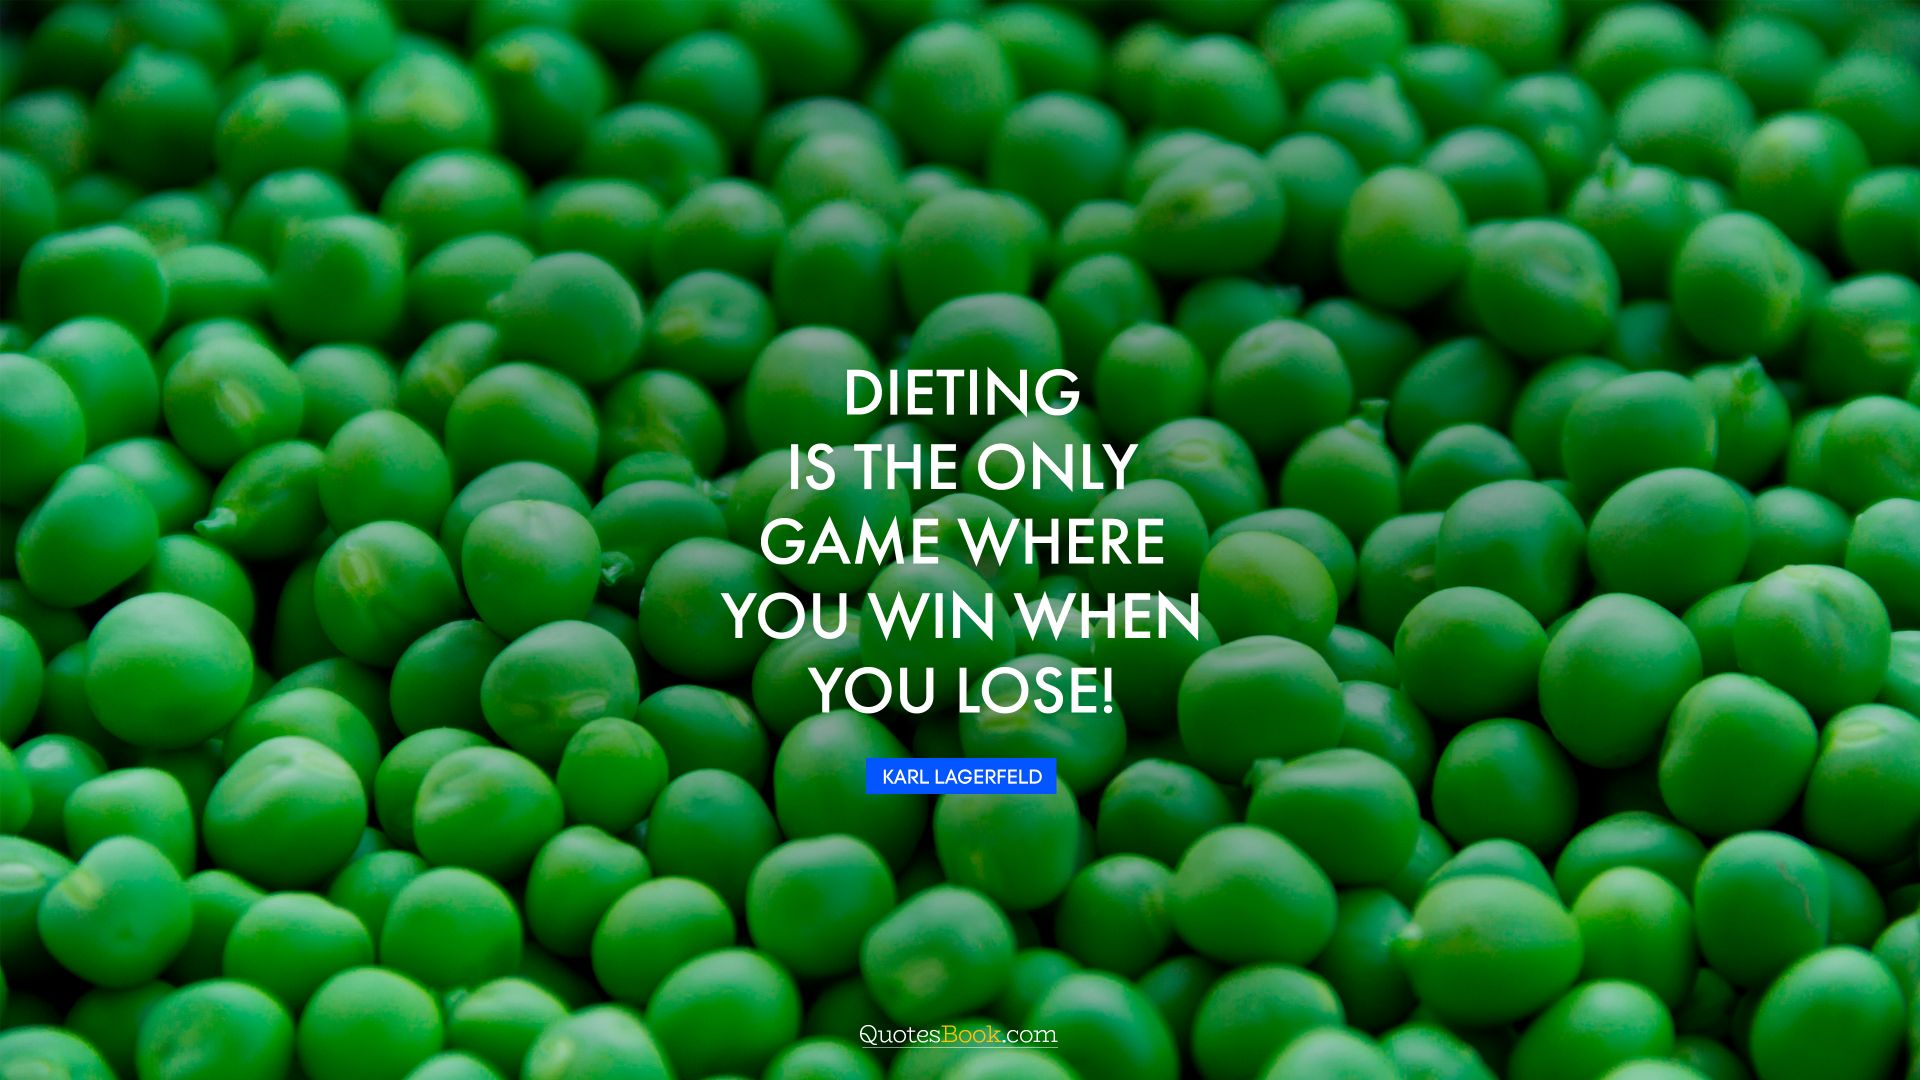 Dieting is the only game where you win when you lose!. - Quote by Karl Lagerfeld